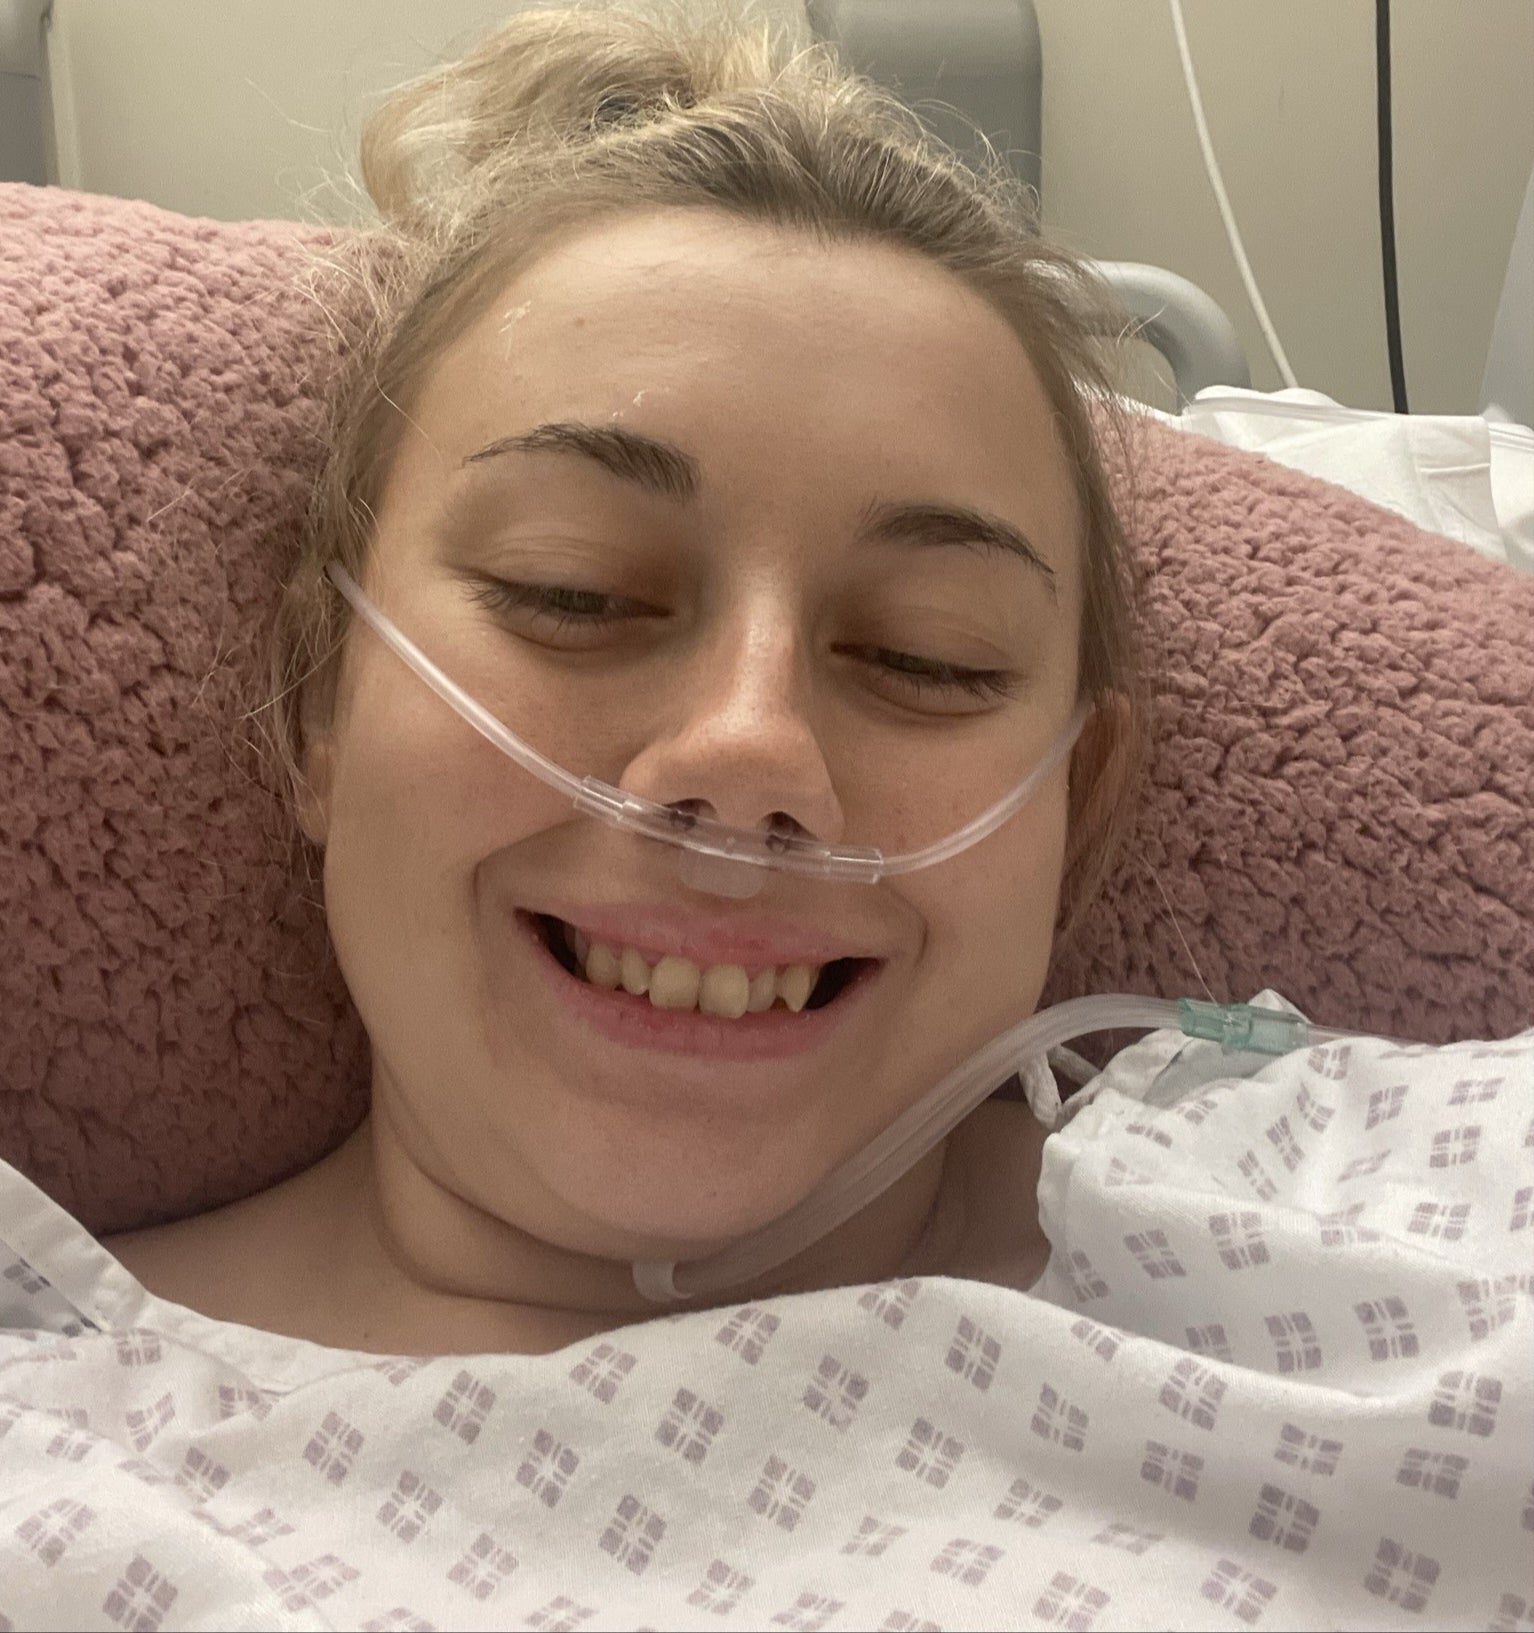 Emma Colledge, from Durham, was diagnosed with stage three ovarian cancer in September 2022 after scans showed she had a 30-centimeter cyst